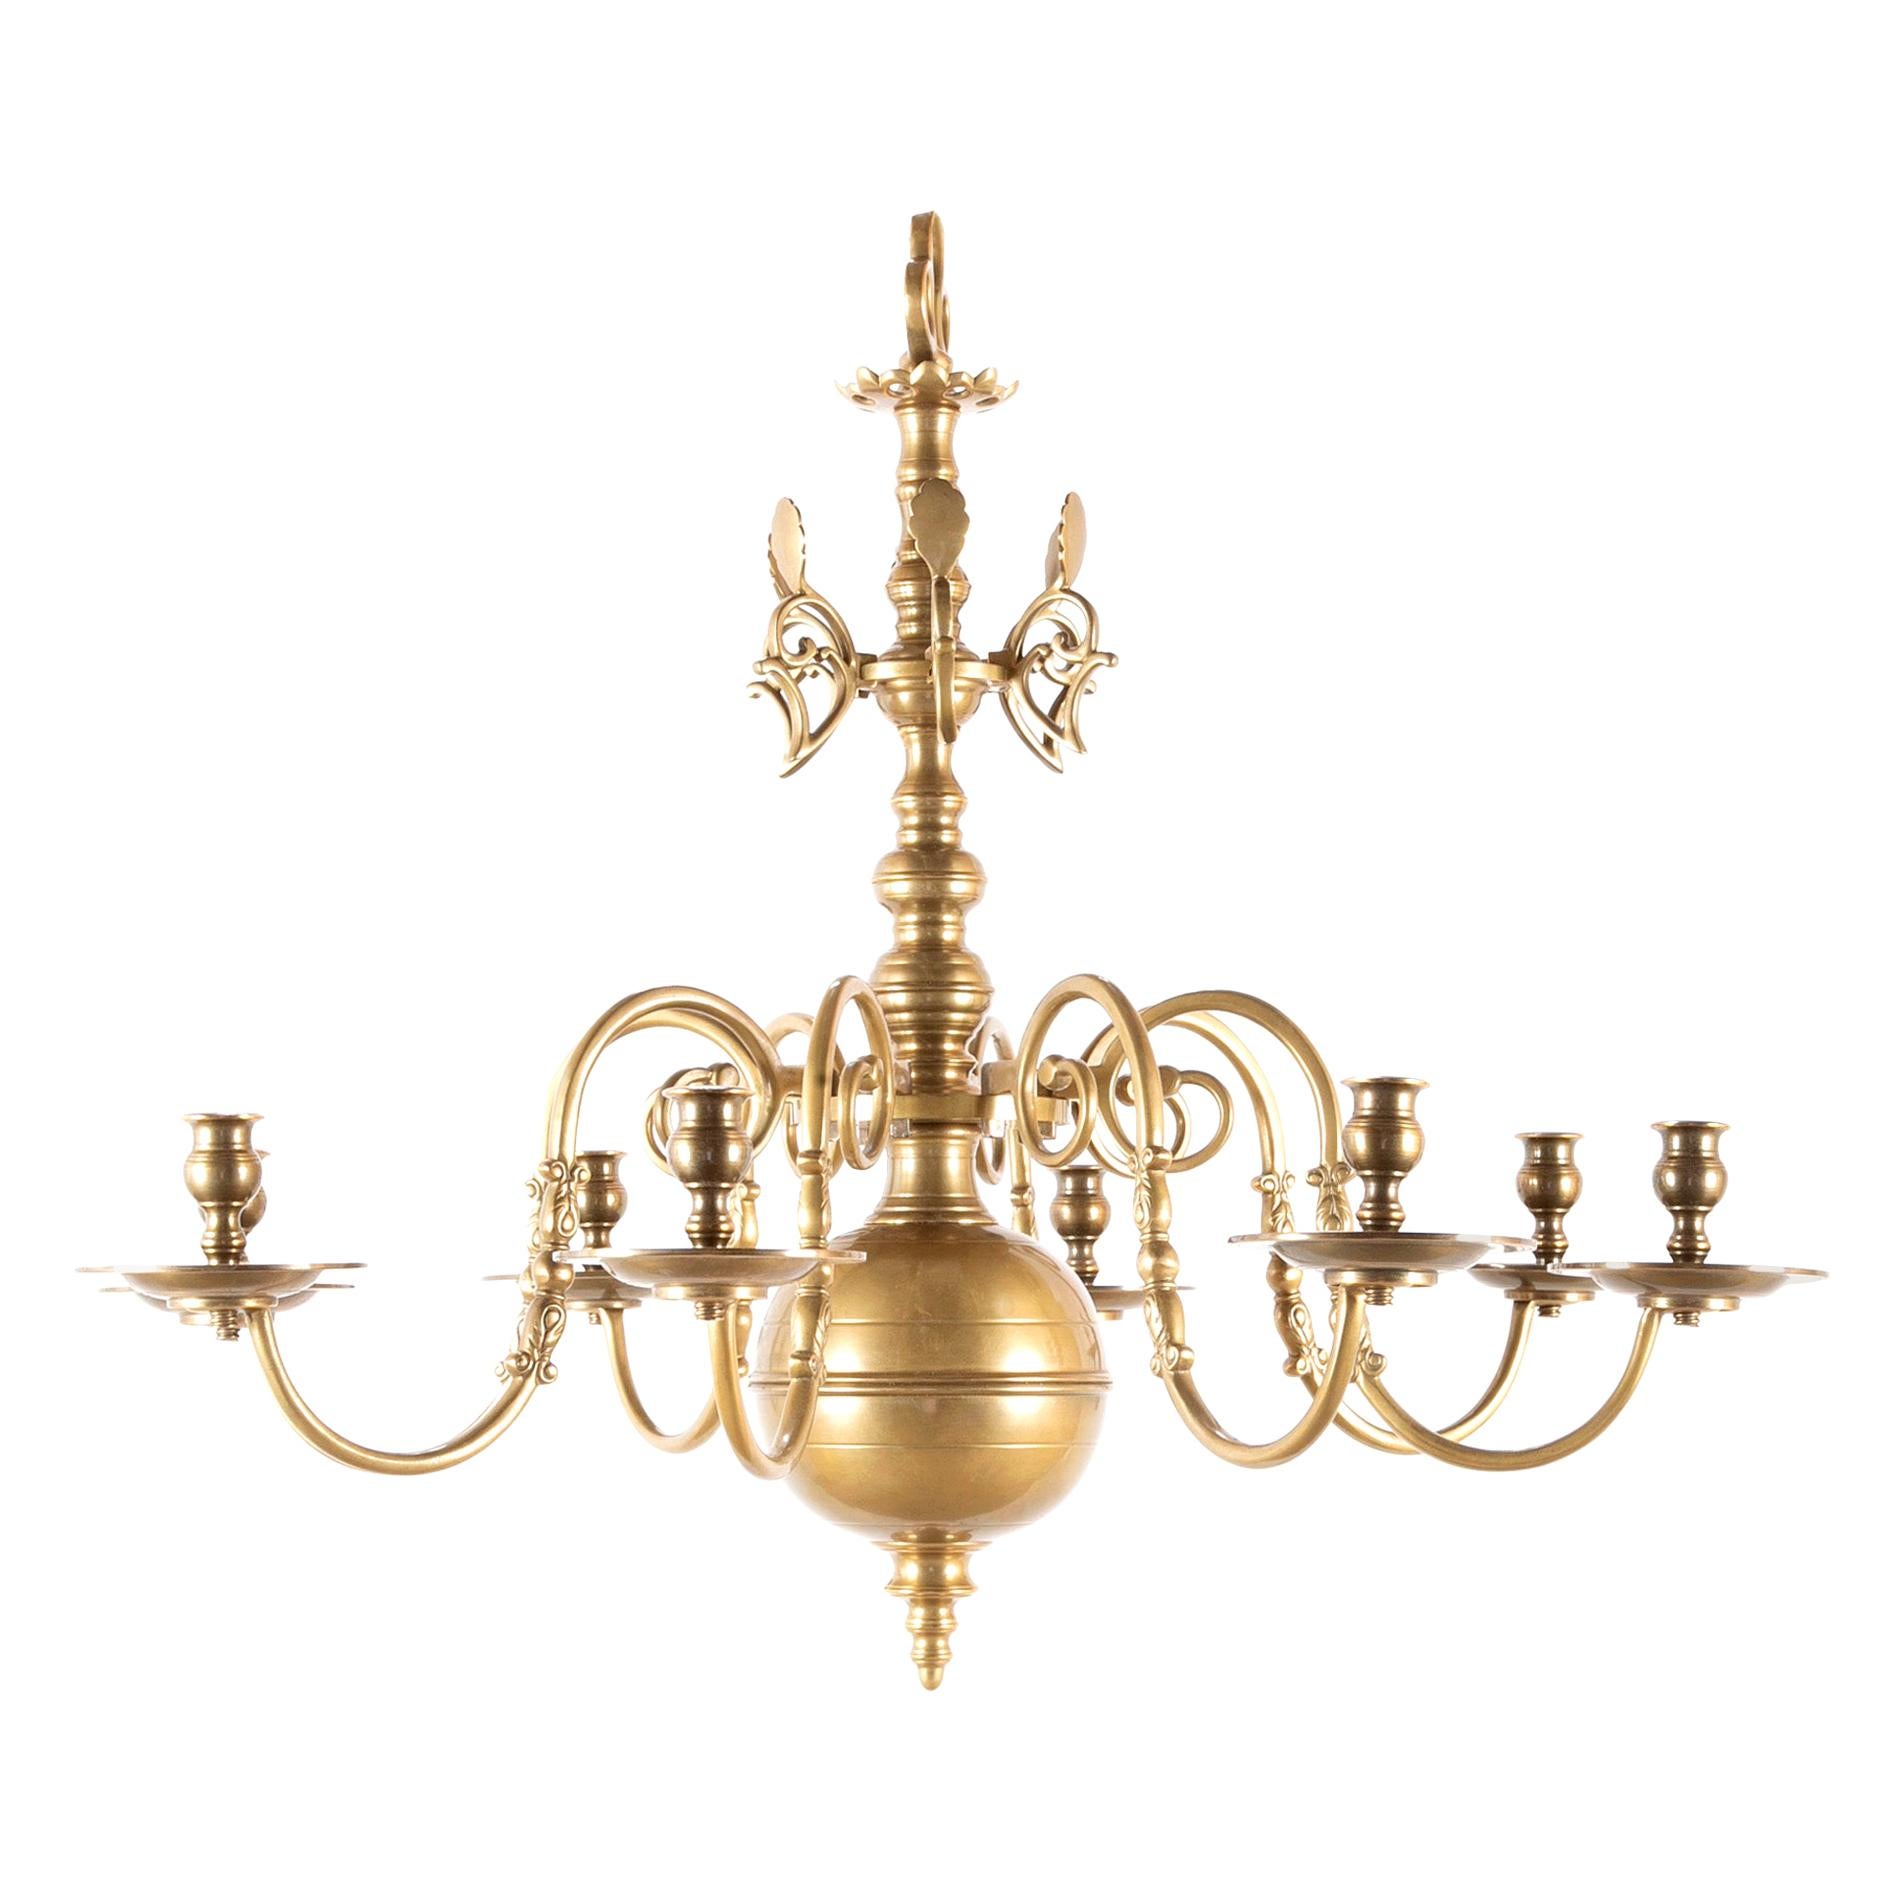 Solid Cast Brass Queen Anne Style Eight-Arm Chandelier with Rare Reflectors